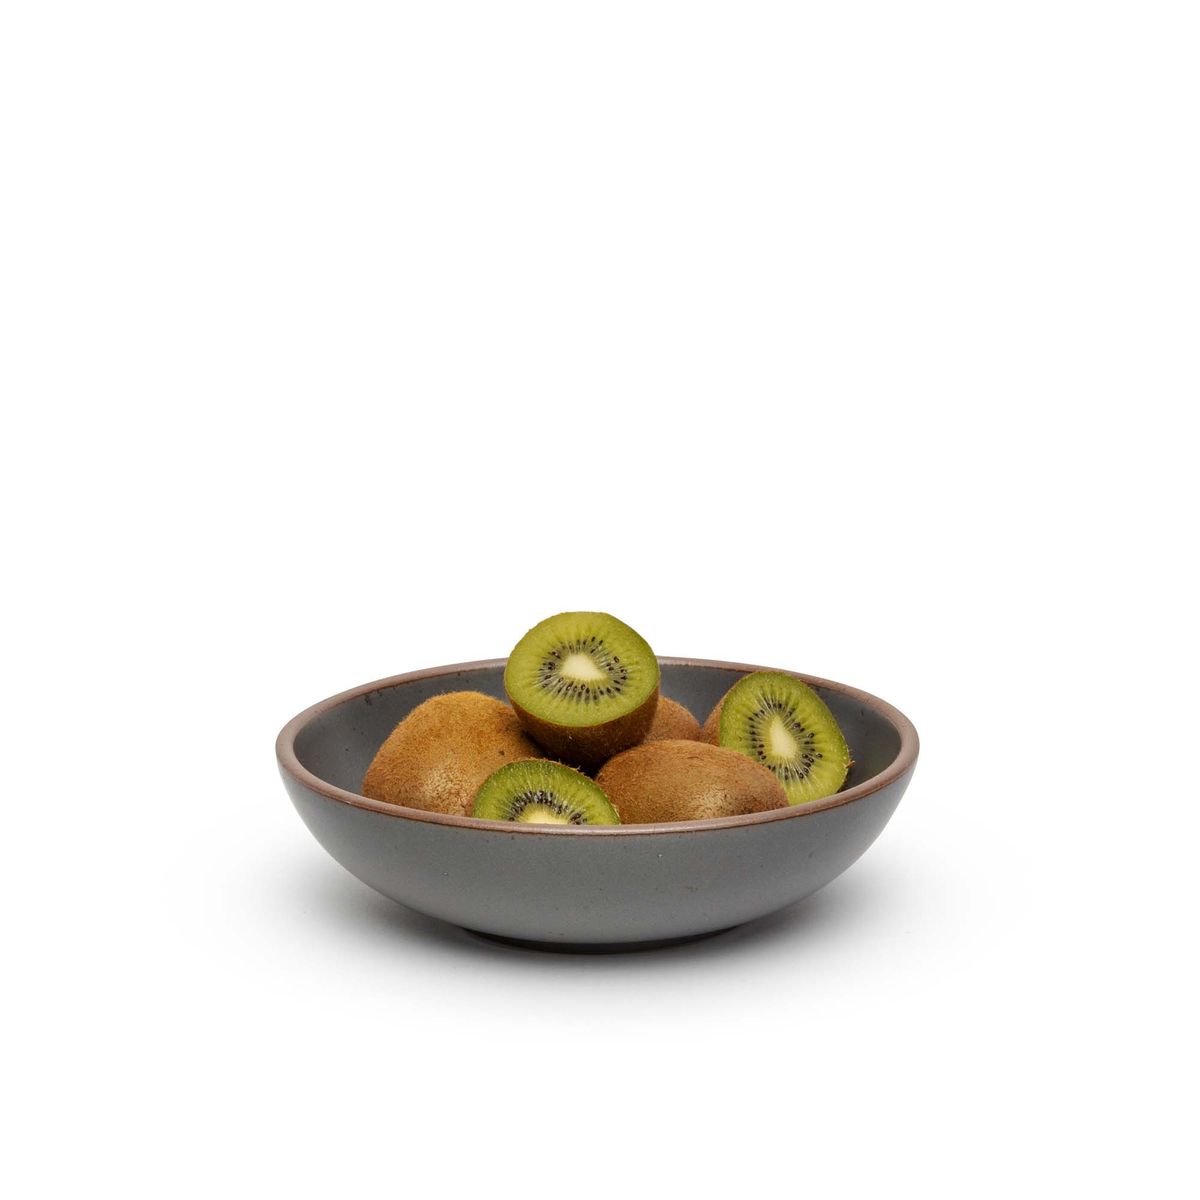 A dinner-sized shallow ceramic bowl in a cool, medium grey color featuring iron speckles and an unglazed rim, filled with sliced kiwi